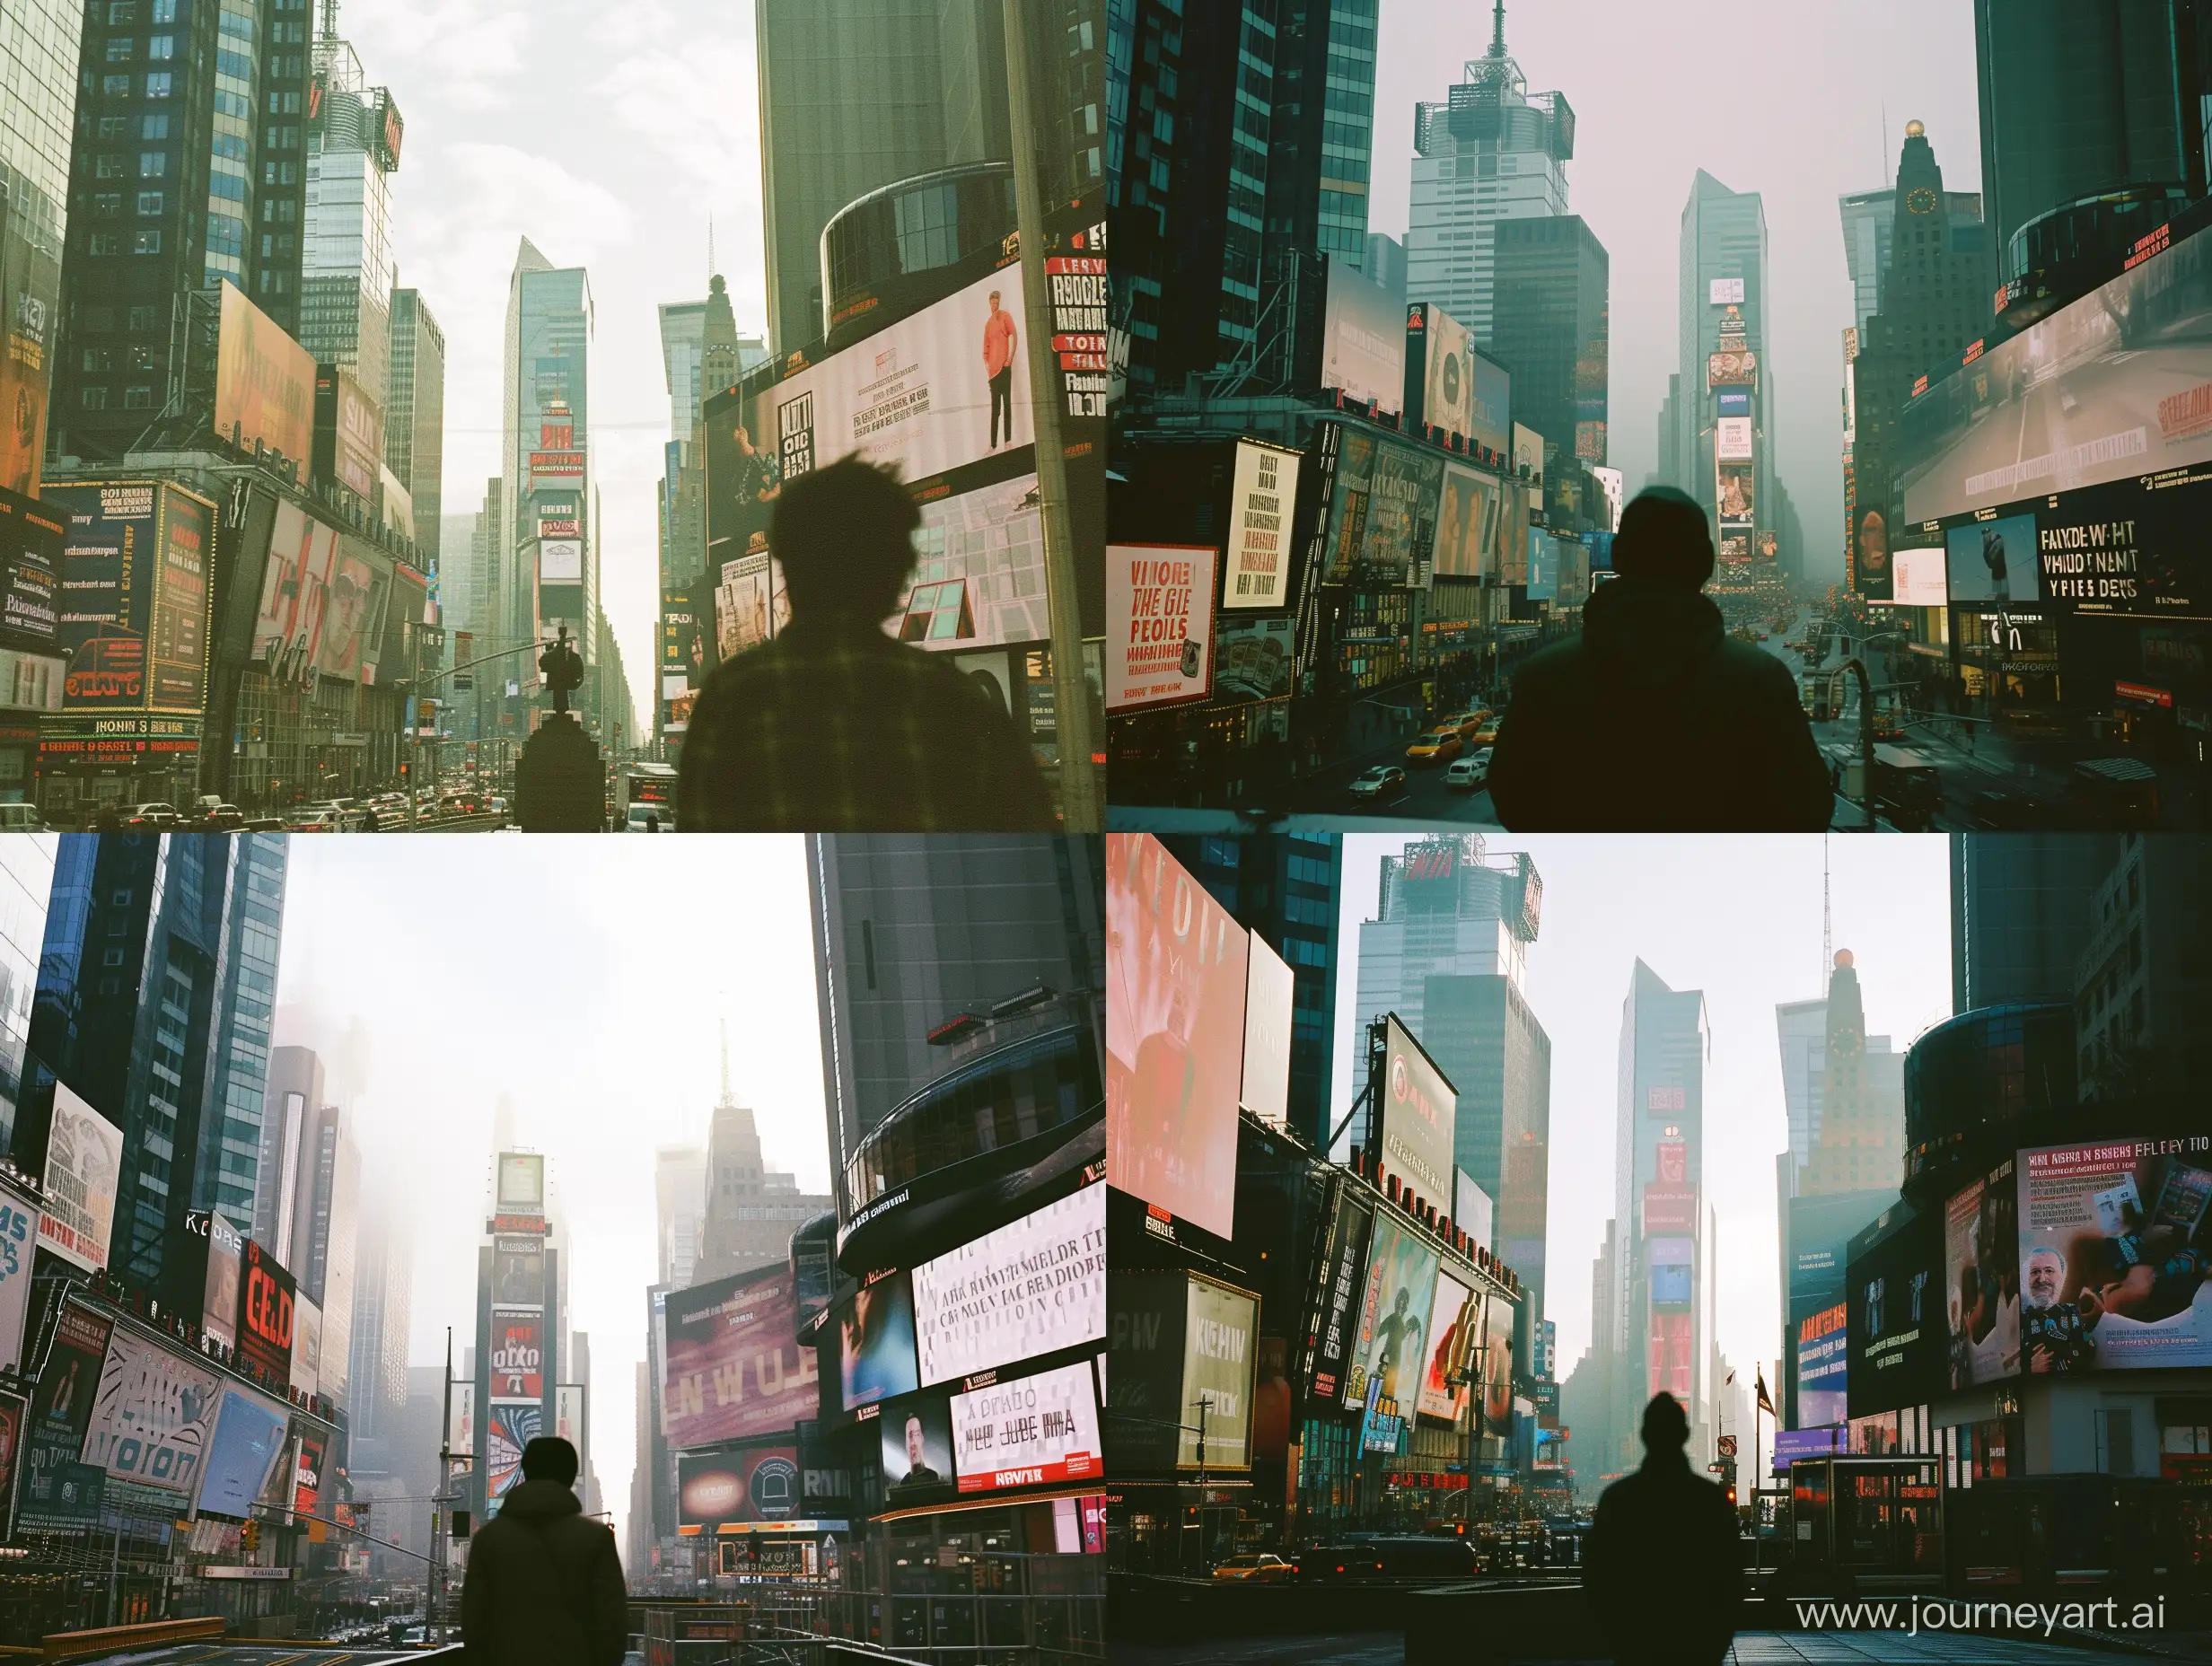 A photo of the New York City skyline taken with Kodak Gold 200 film, capturing the natural lighting and busy city environment. The style is raw and the view is from a third person perspective, with billboards in the background. In the center, a man is seen standing in Times Square.